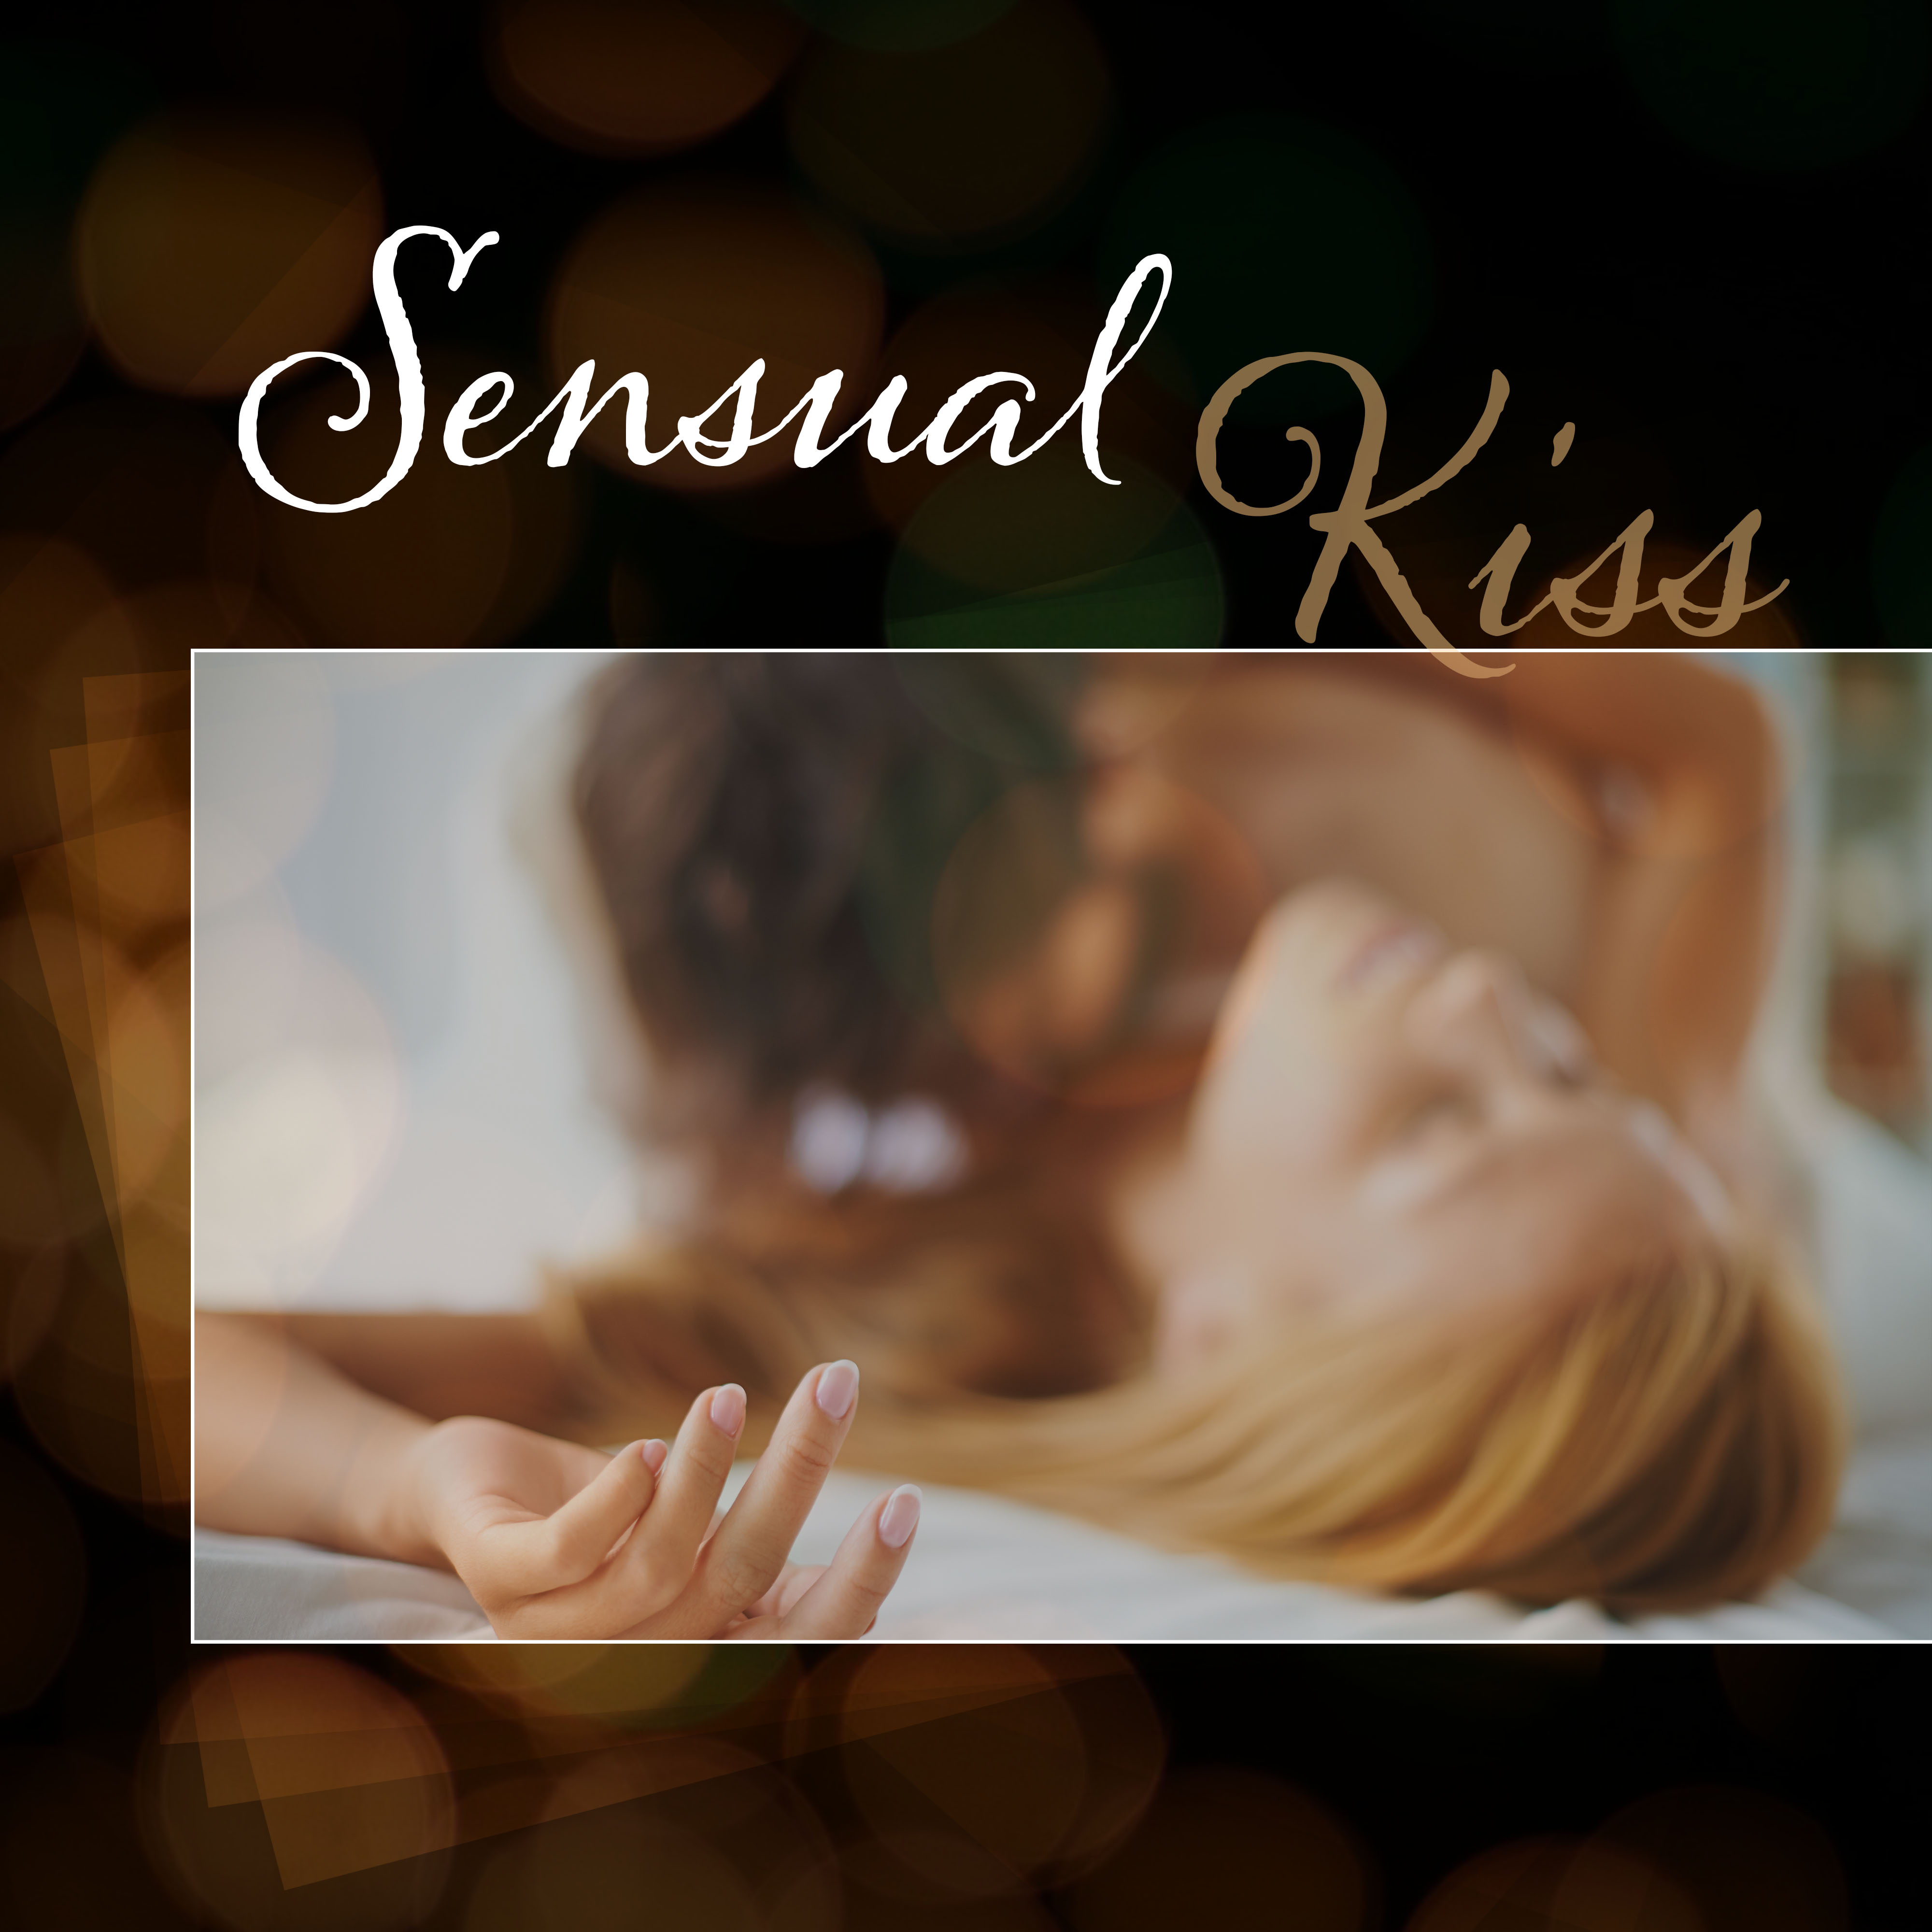 Sensual Kiss – Smooth Jazz for Lovers, True Love, Pure Relaxation, Romantic Evening, Dinner by Candlelight, Mellow Jazz